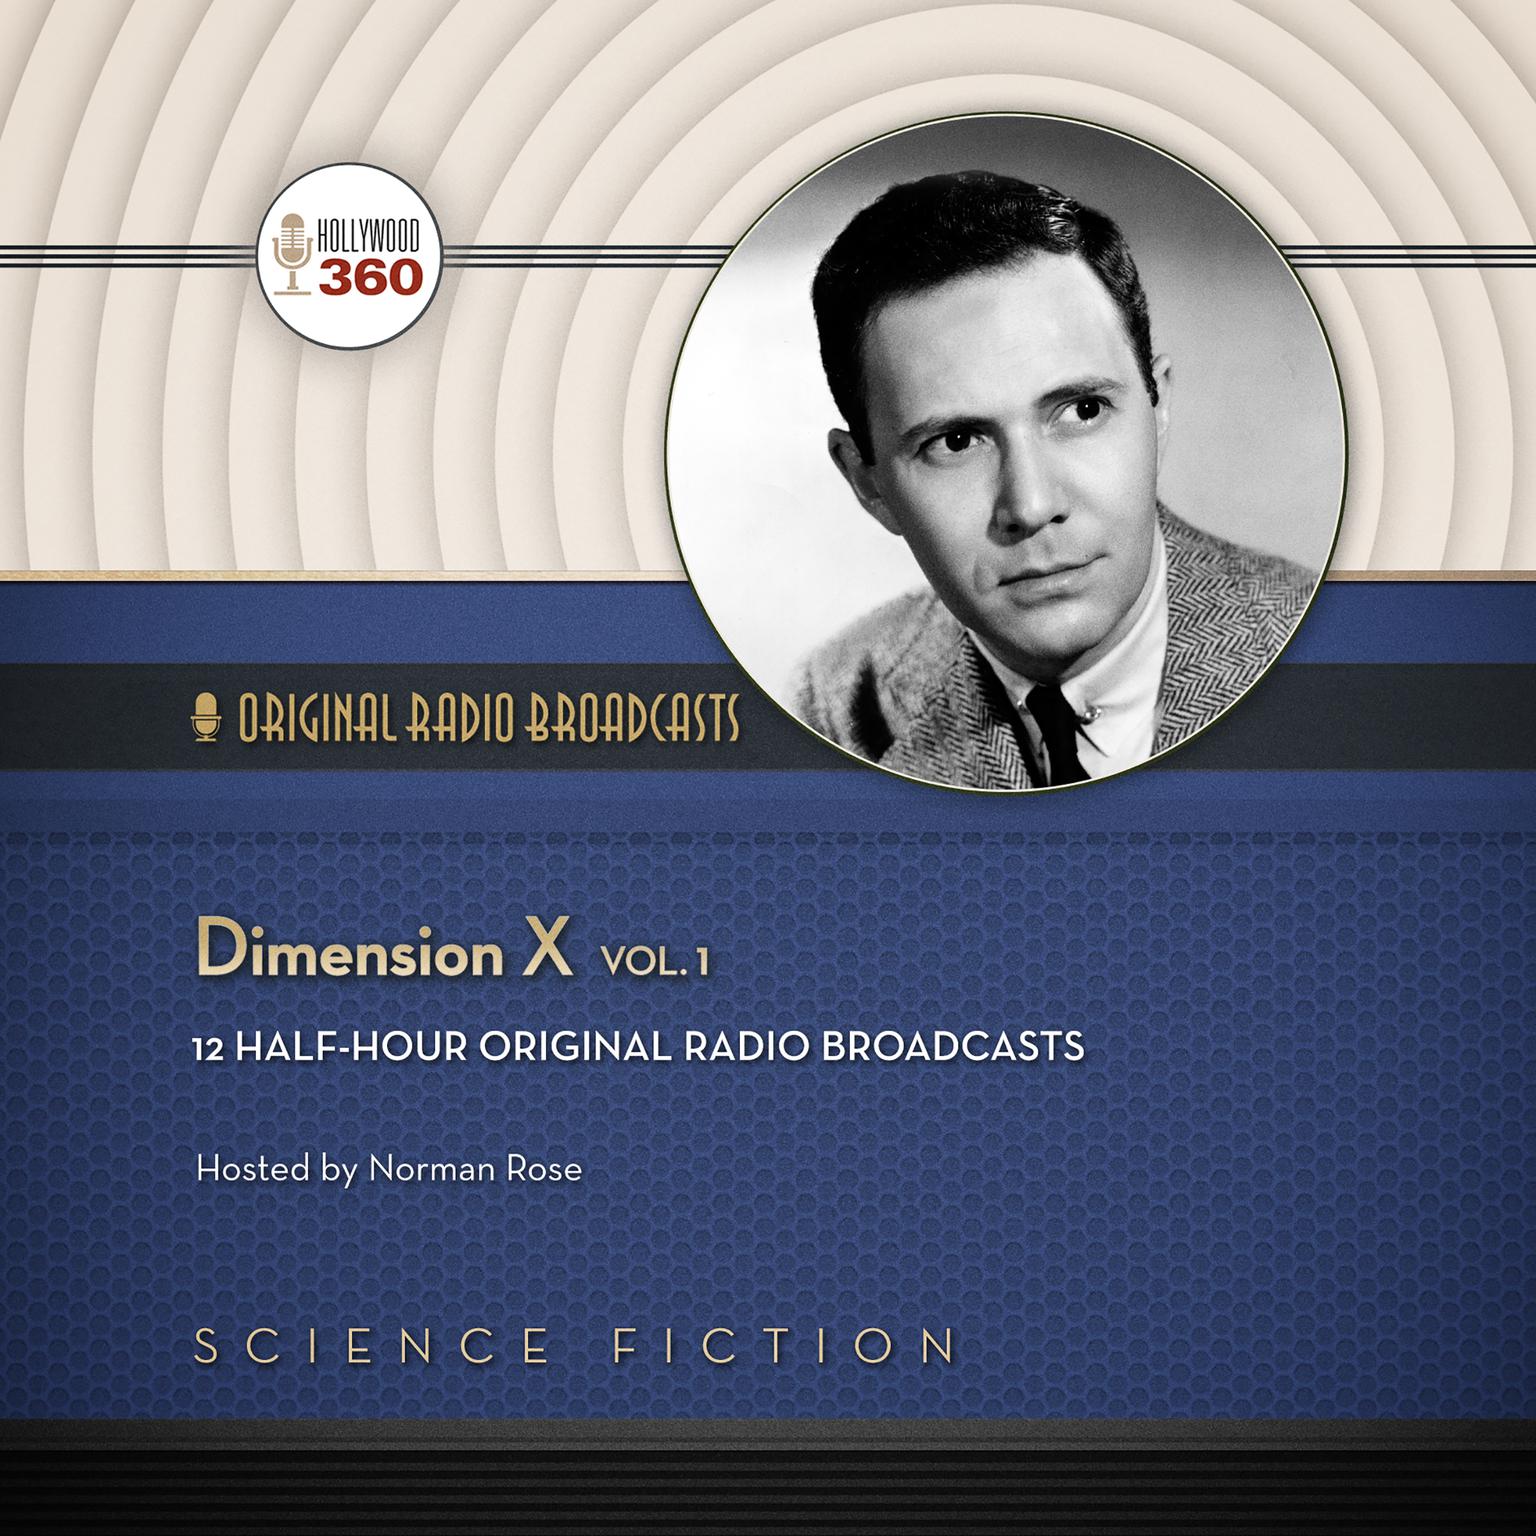 Dimension X, Vol. 1 Audiobook, by Hollywood 360